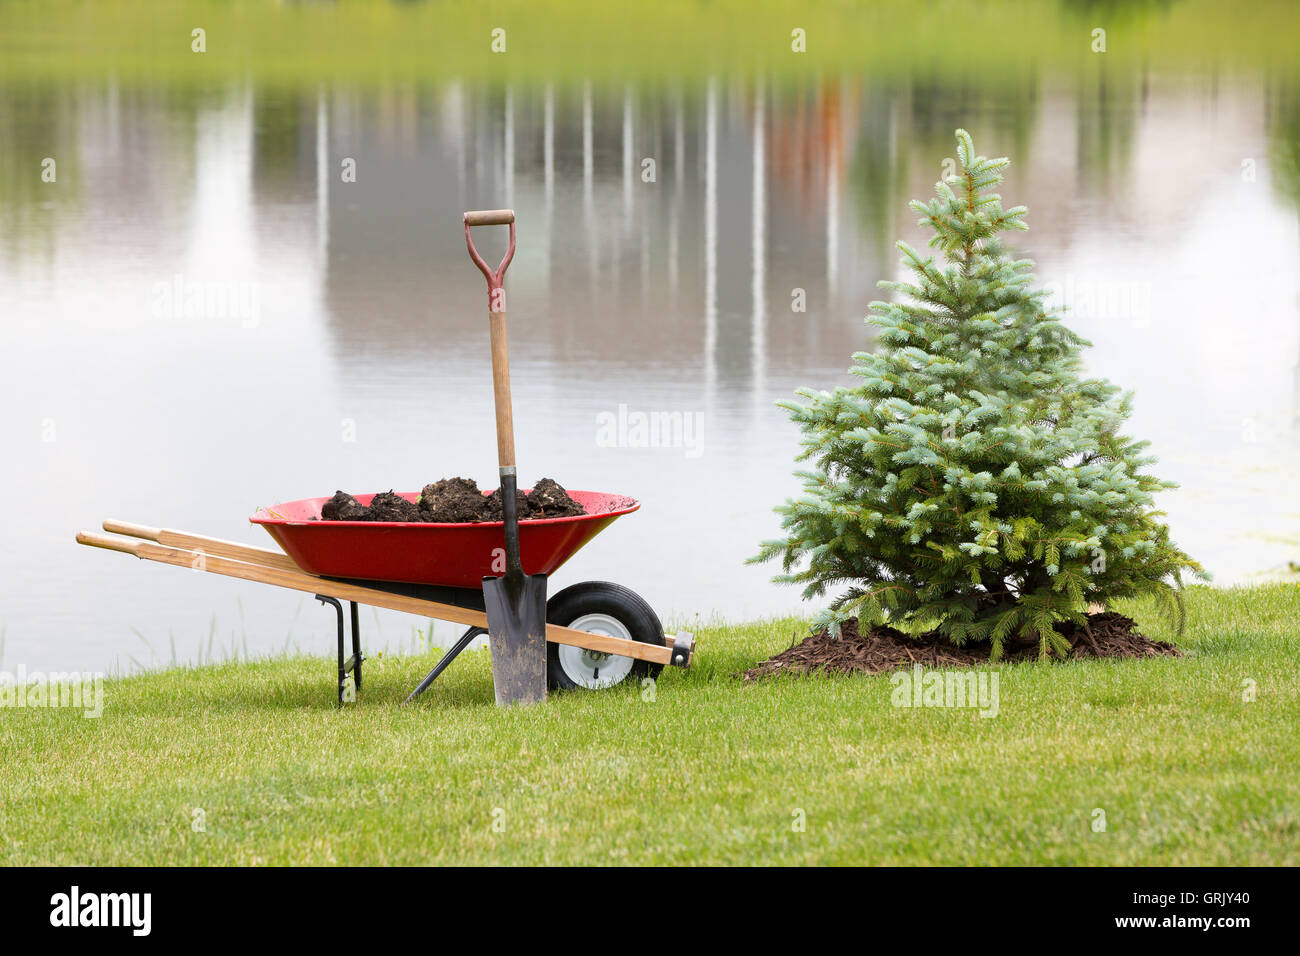 Planting an ornamental evergreen cypress or conifer on the bank of a tranquil lake with a wheelbarrow full of potting soil or ma Stock Photo